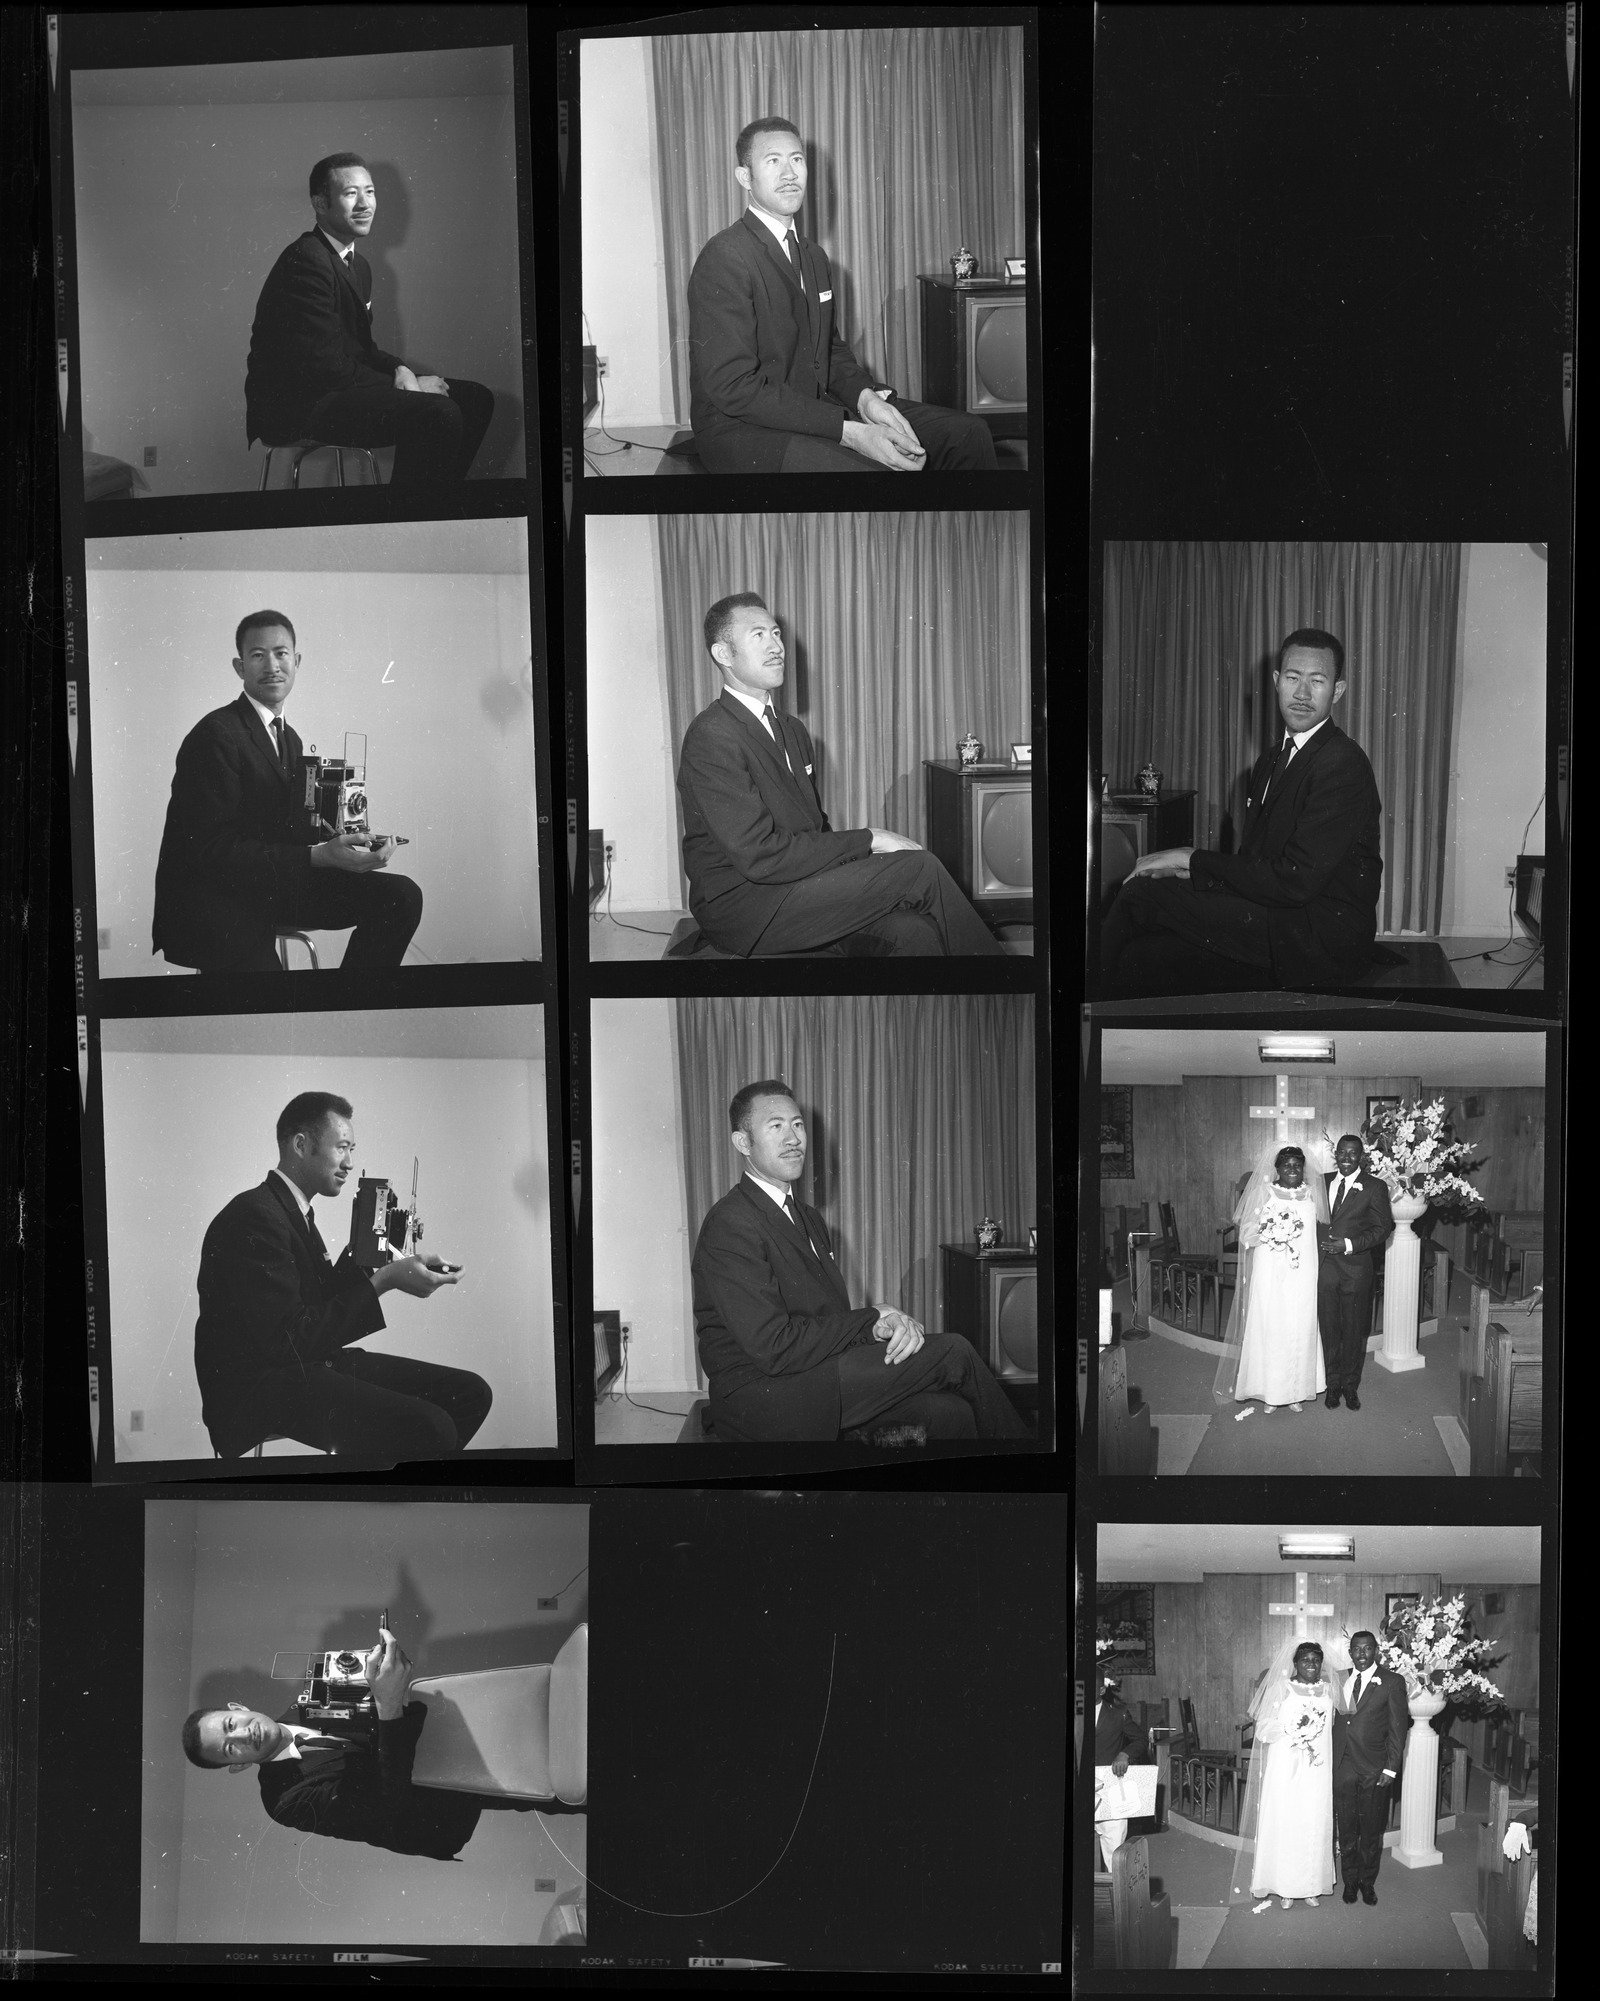 Set of negatives by Clinton Wright including wedding of Lenola Alexander, baseball team, Derick Scott, Reverend at New Jerusalem, Pastor's aid Club at N.J., and Clinton Wright with camera, 1968, page 2